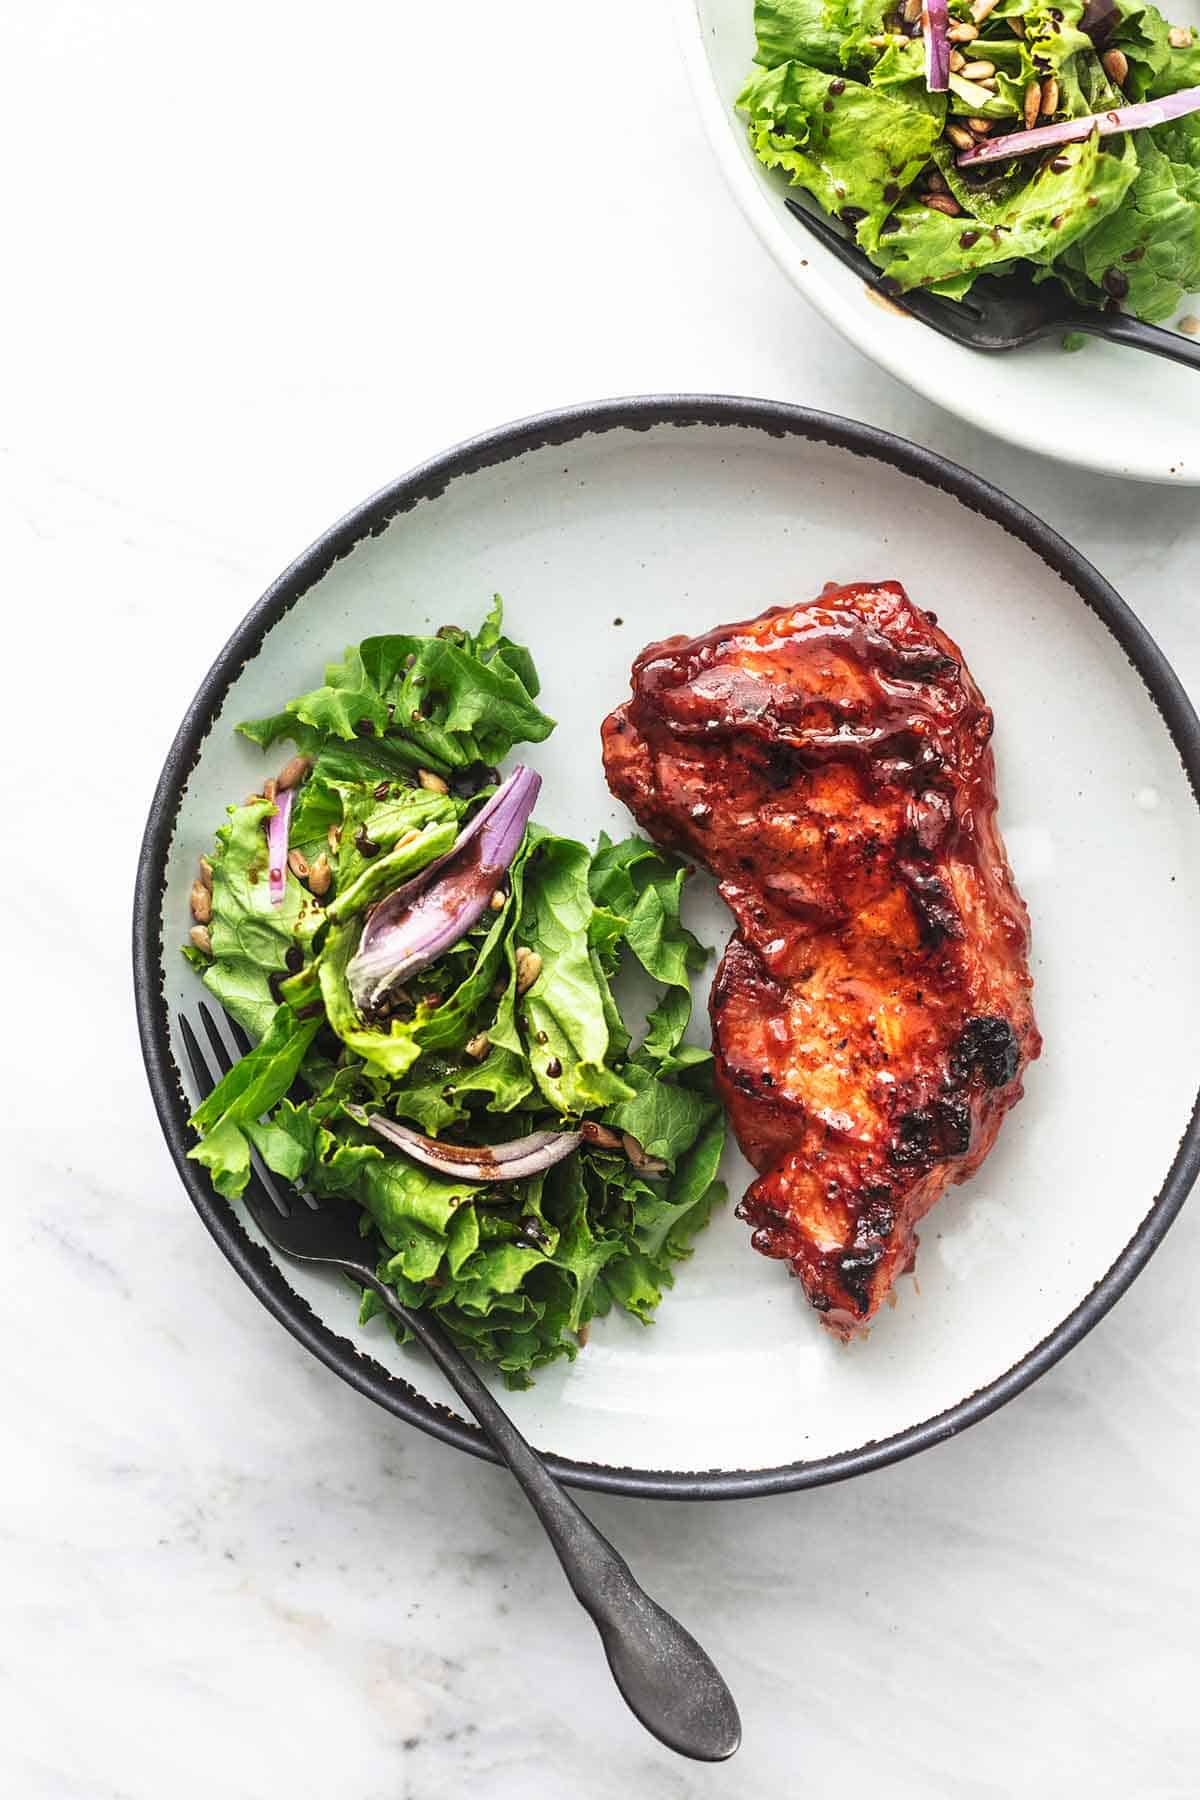 top view of a grilled bbq pork chop with salad and a fork on a plate.